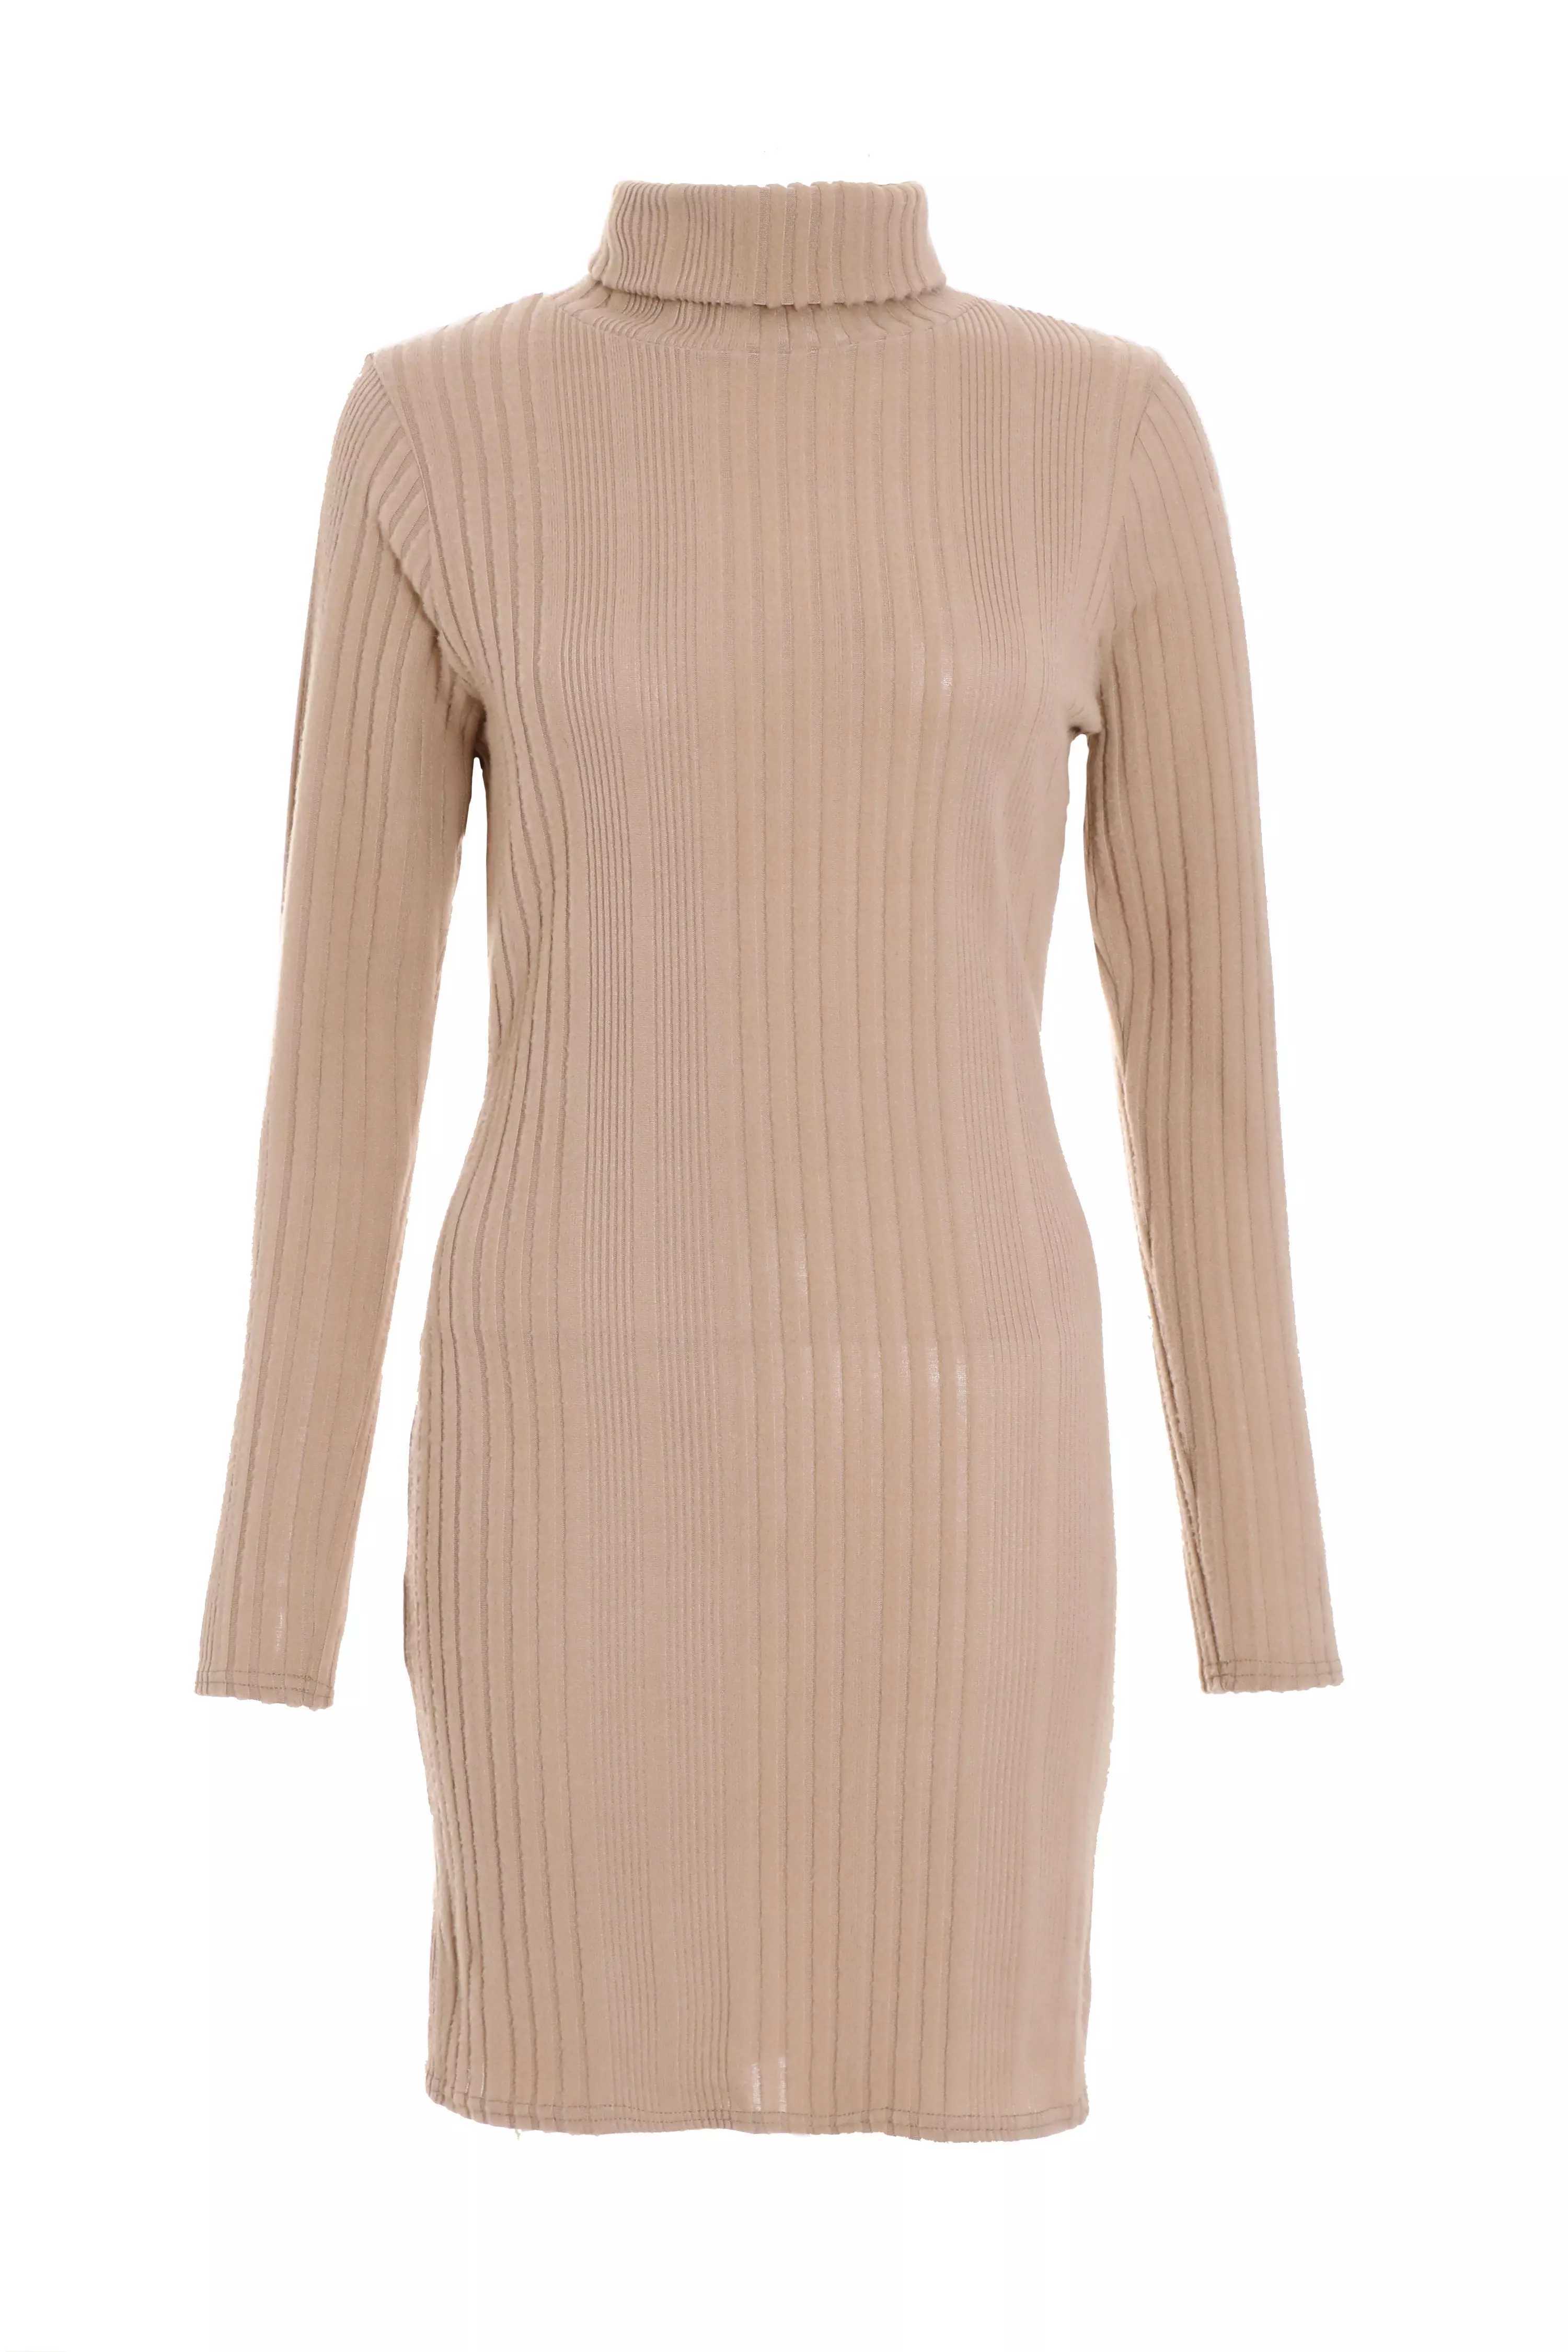 Stone Knitted High Neck Bodycon Mini Dress